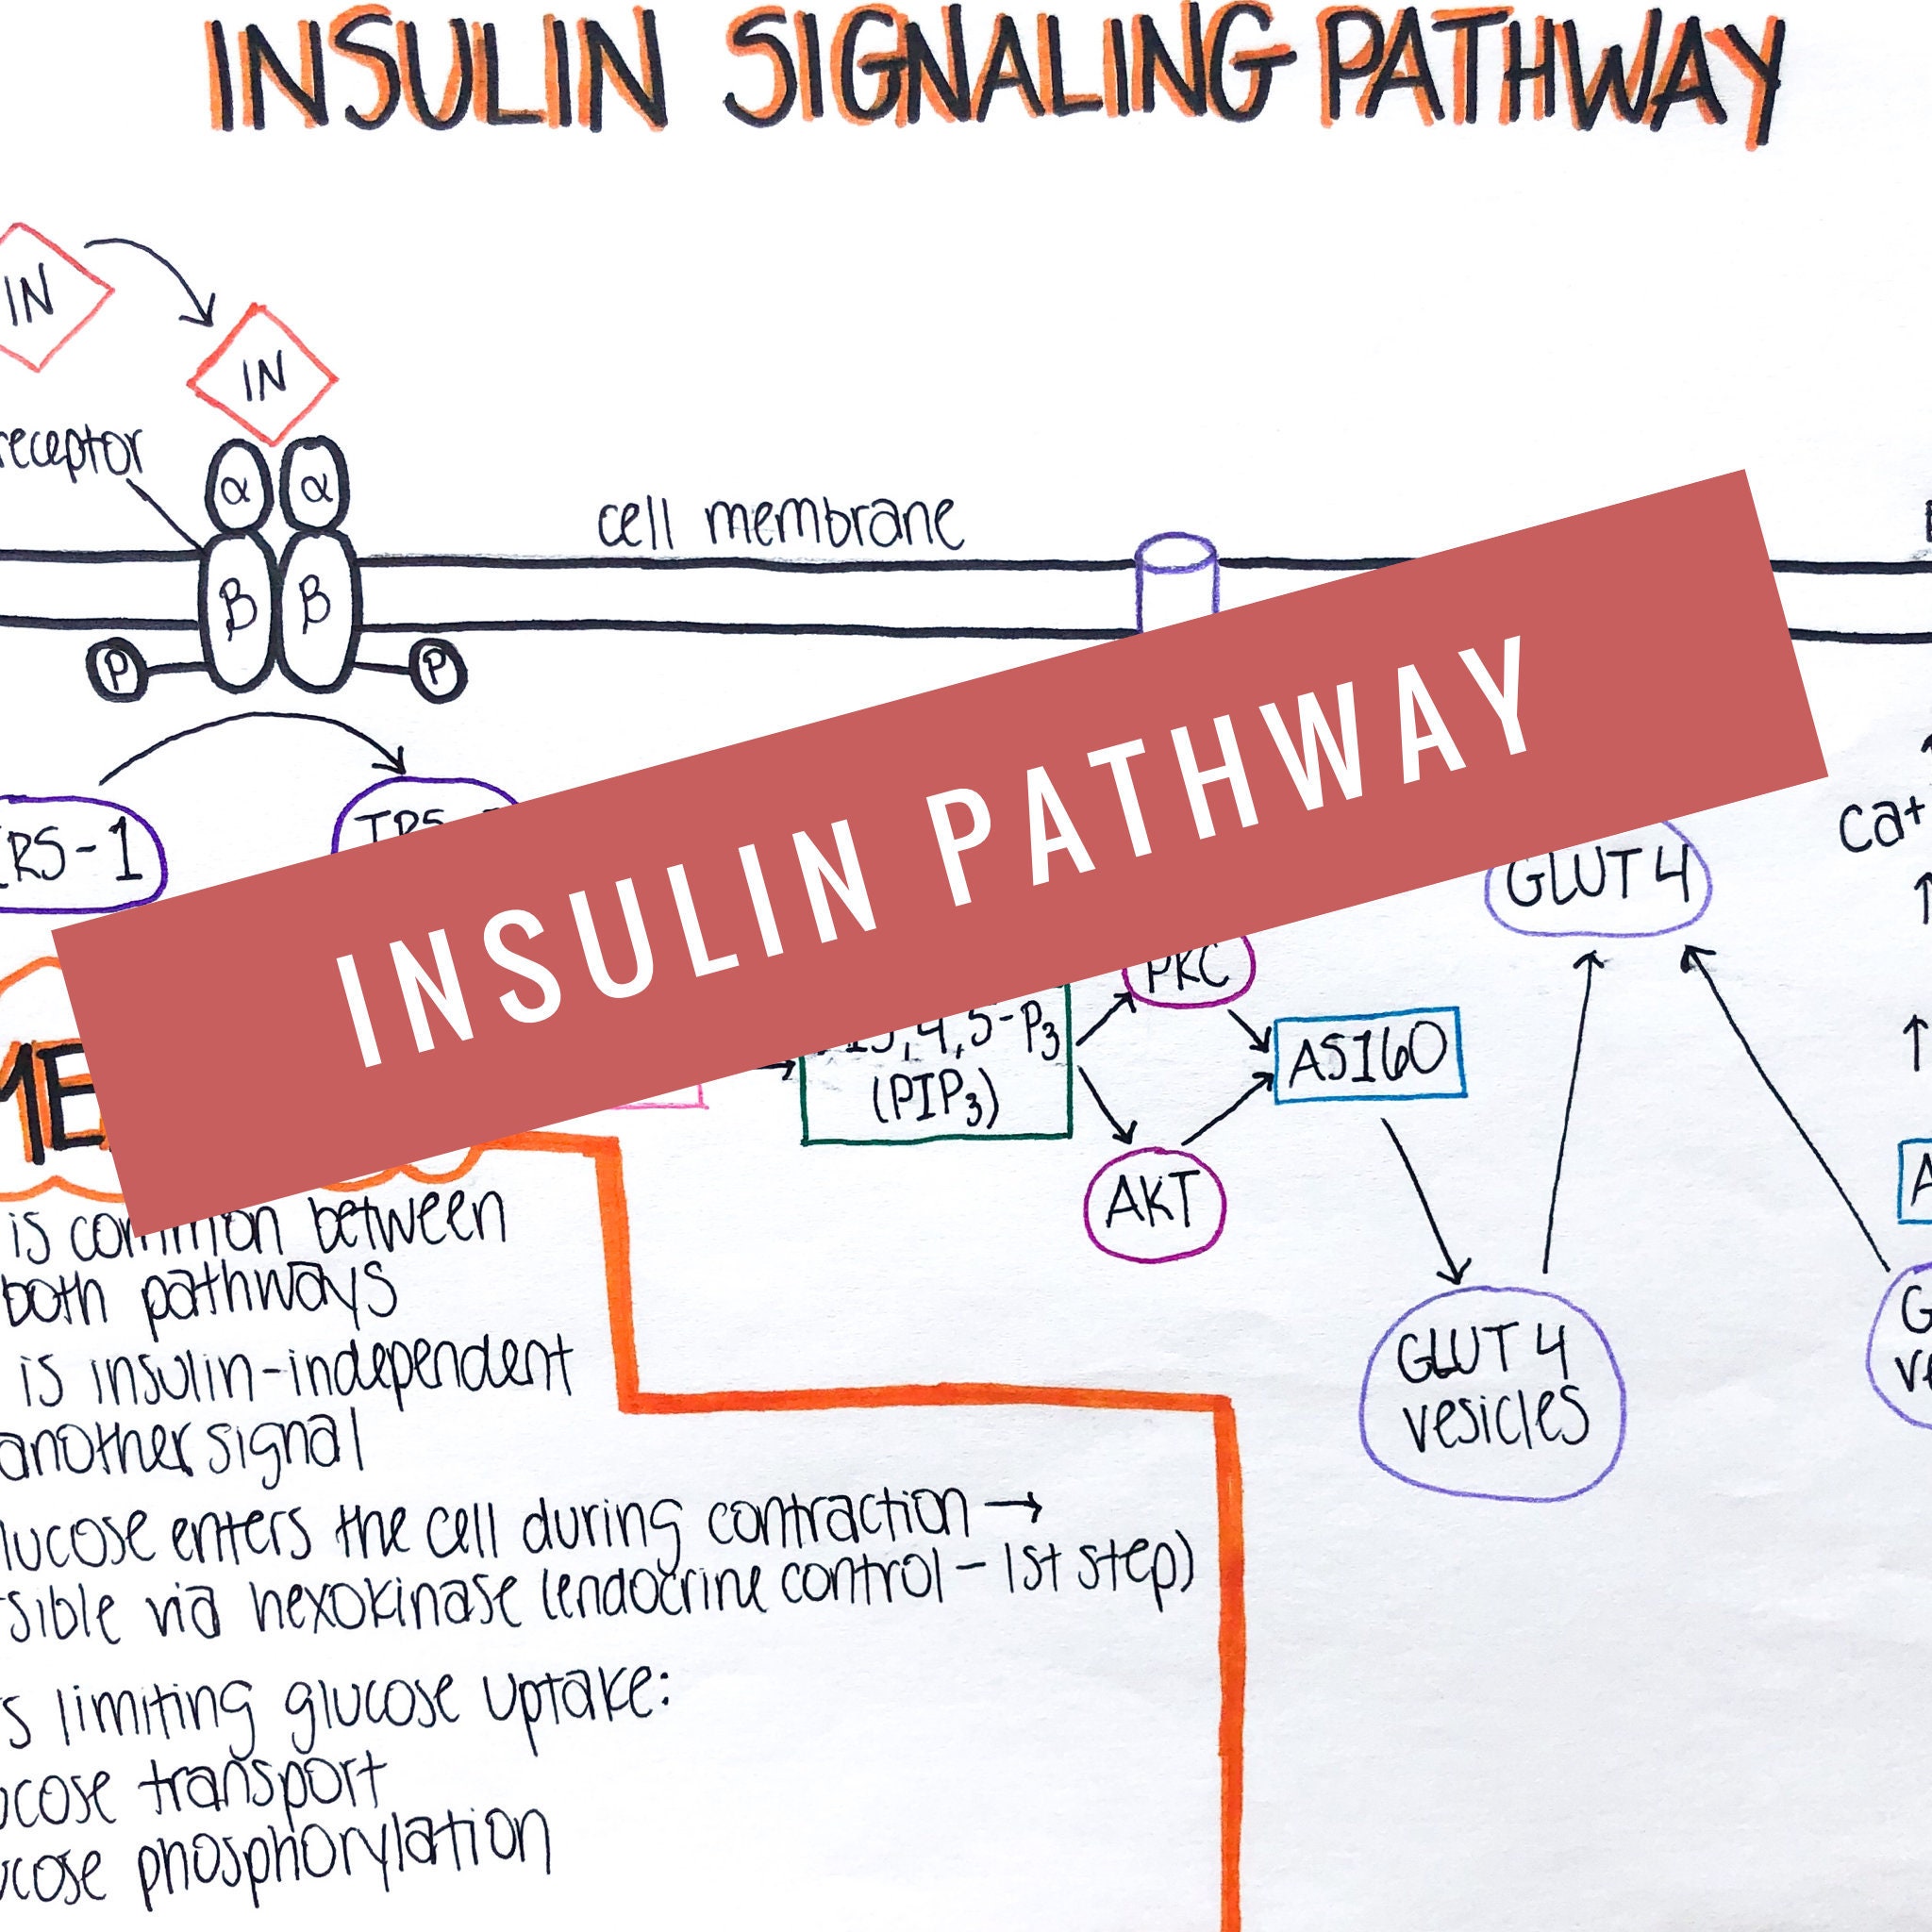 case study diabetes and insulin signaling